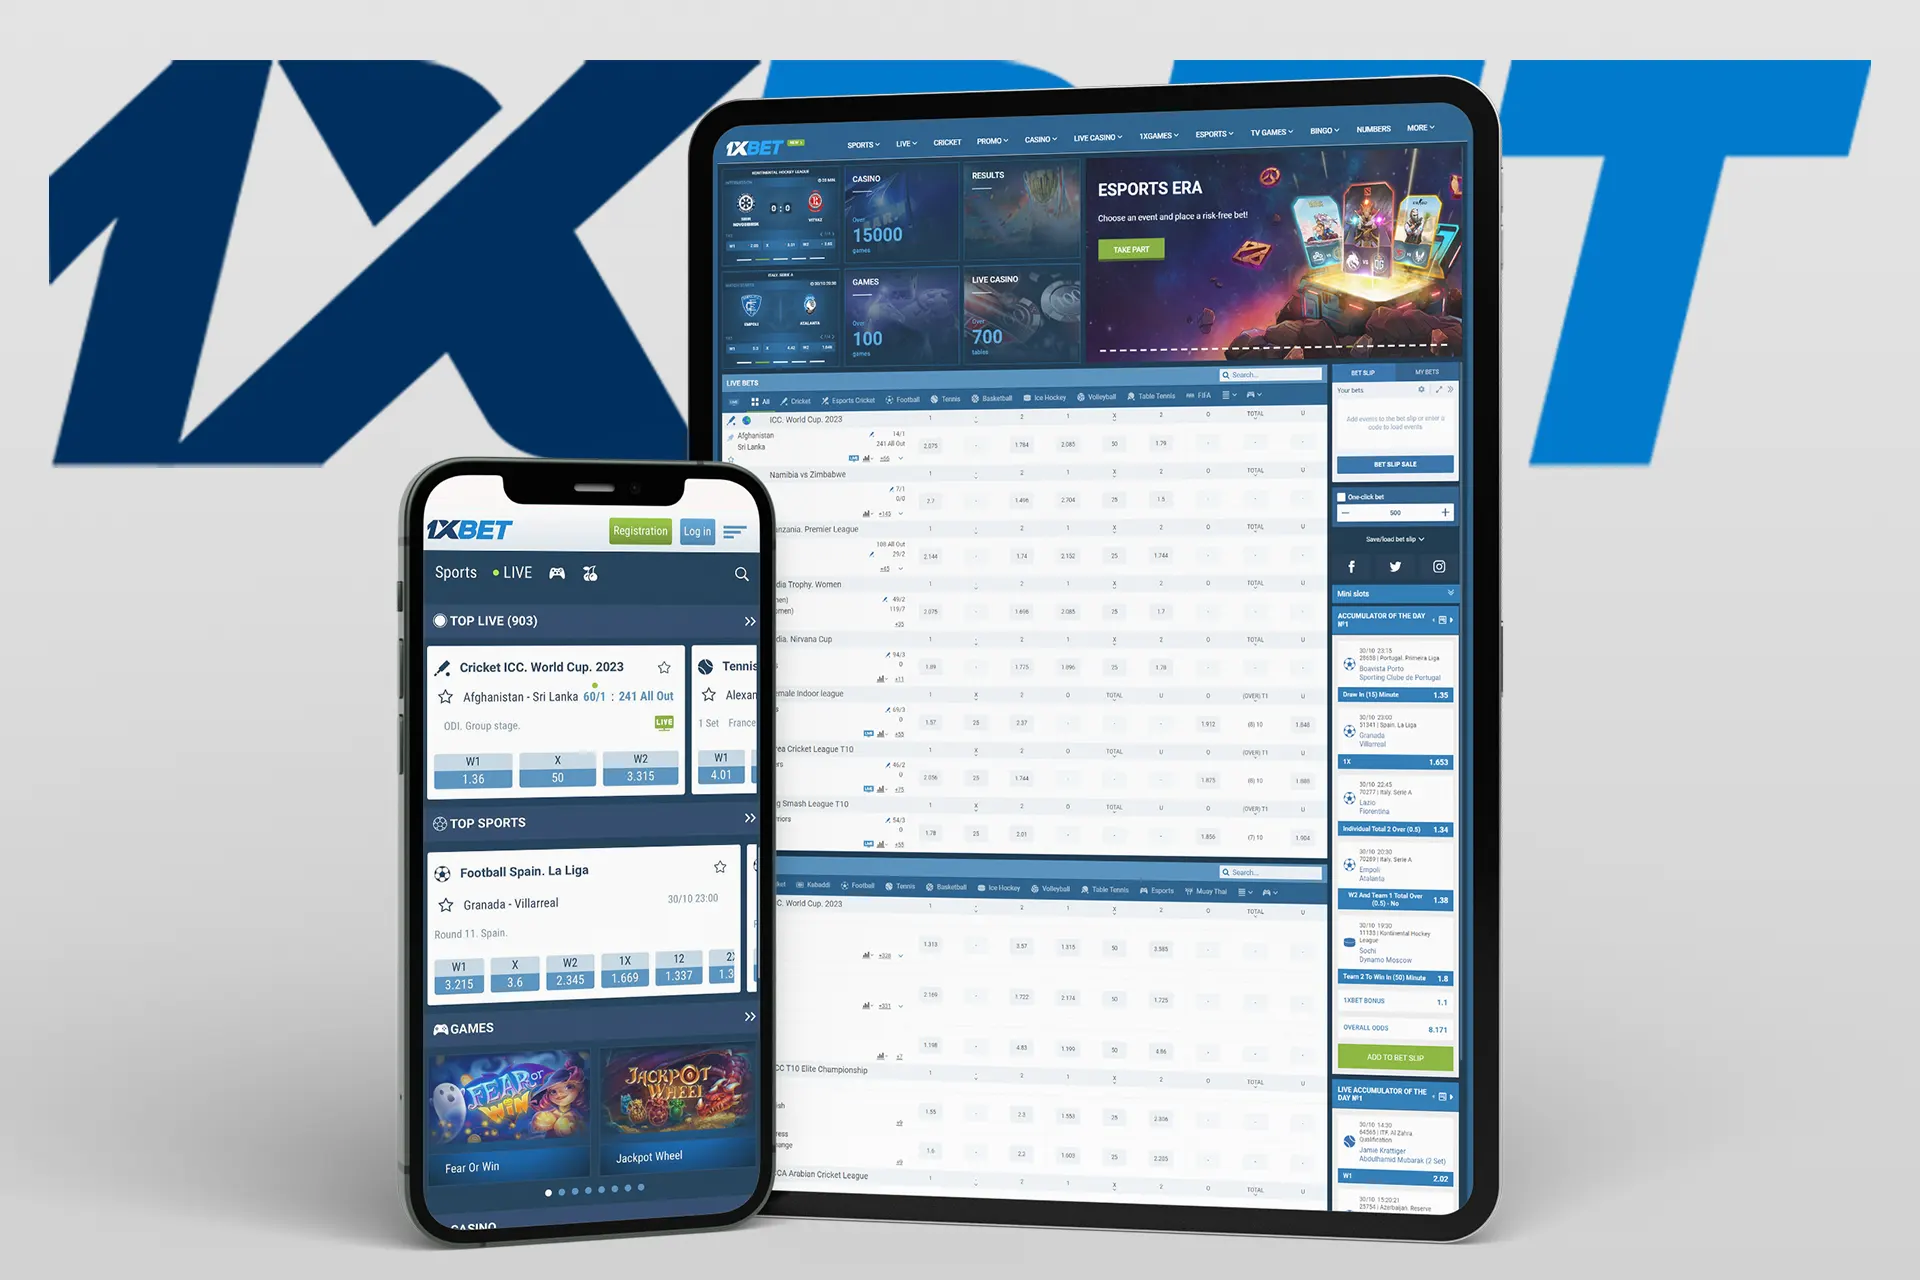 1xbet mobile app for iPhone and iPad